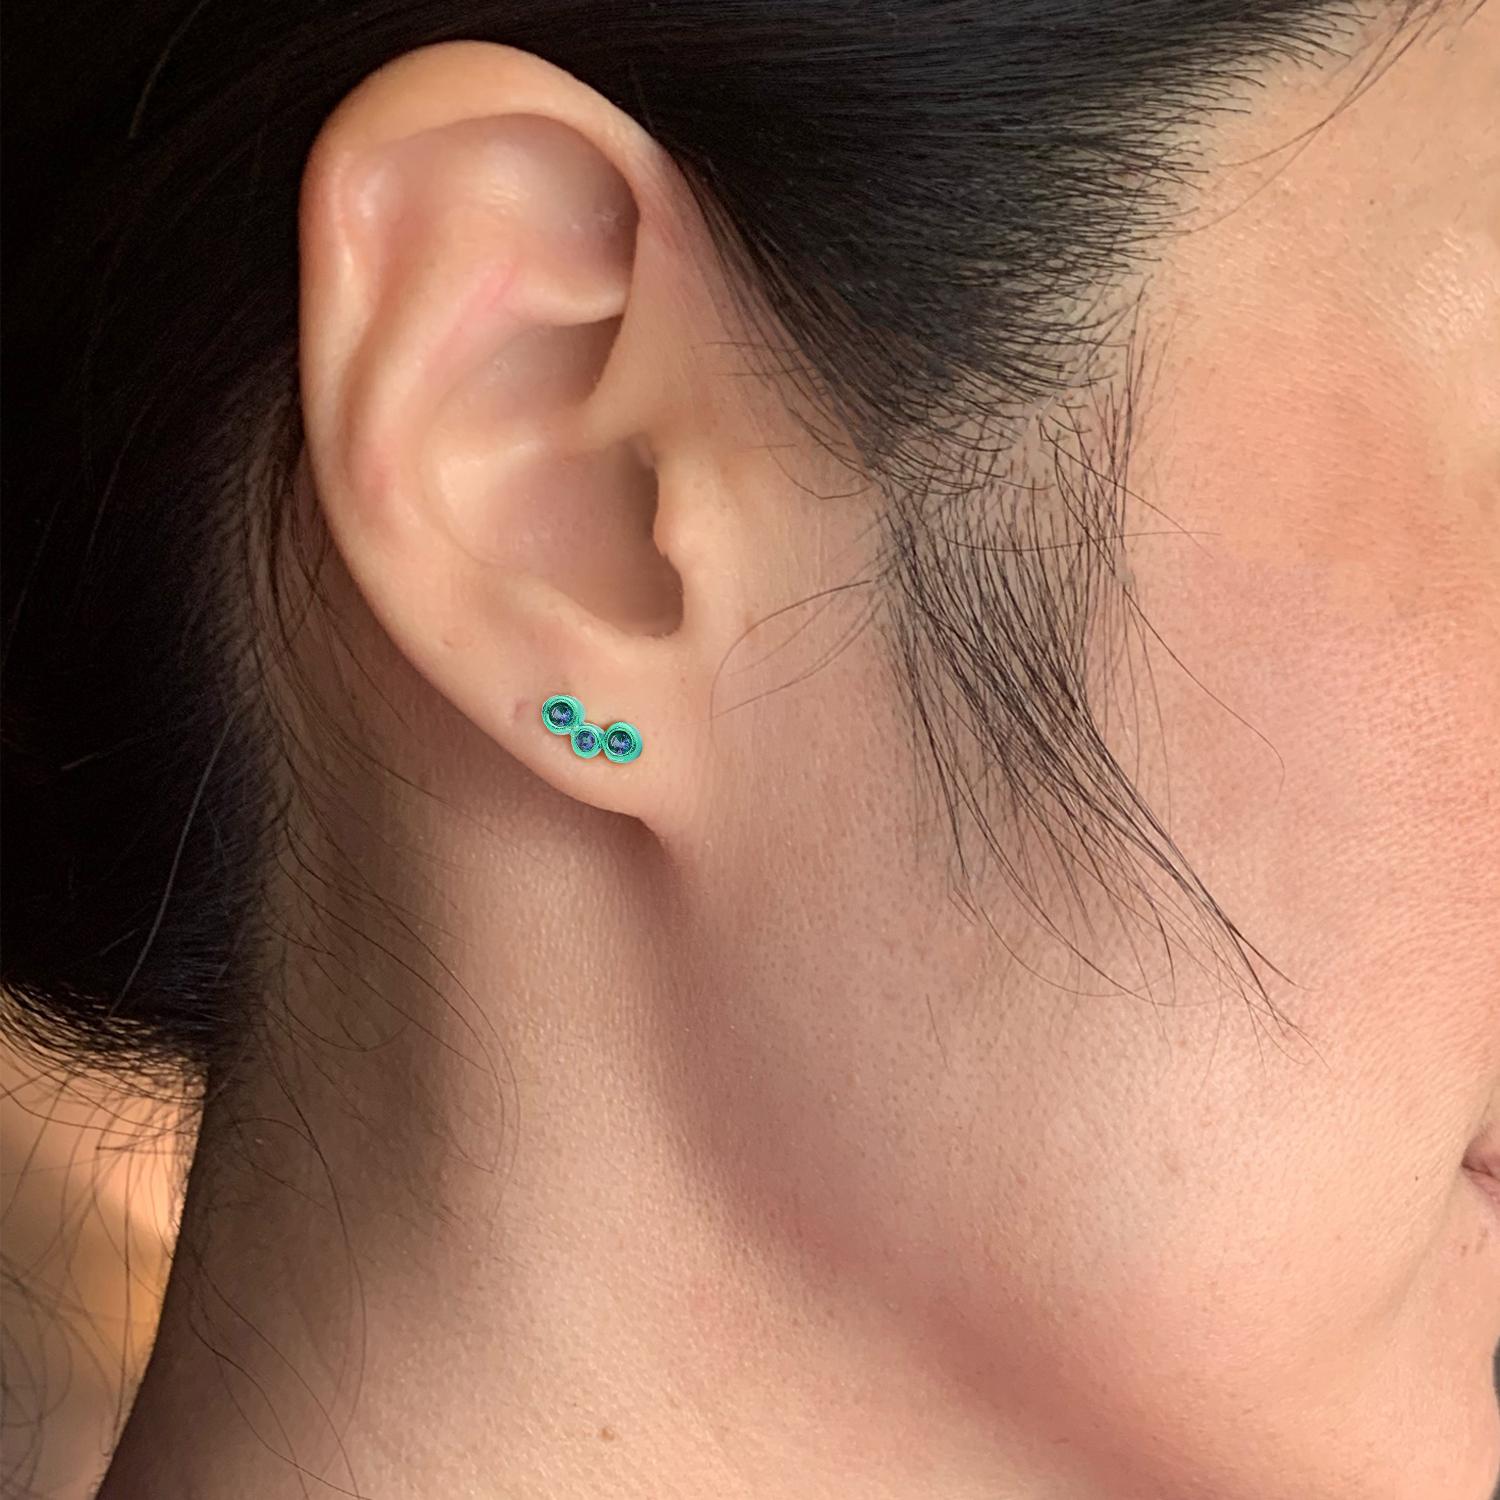 Hi June Parker's mini version of her climber earrings, adding a pop of
electric emerald Green to your ears with this 3-stone SINGLE stud.

Inspired by seeing the cross-section view of life, as if slicing a tree to see its underlying structure and